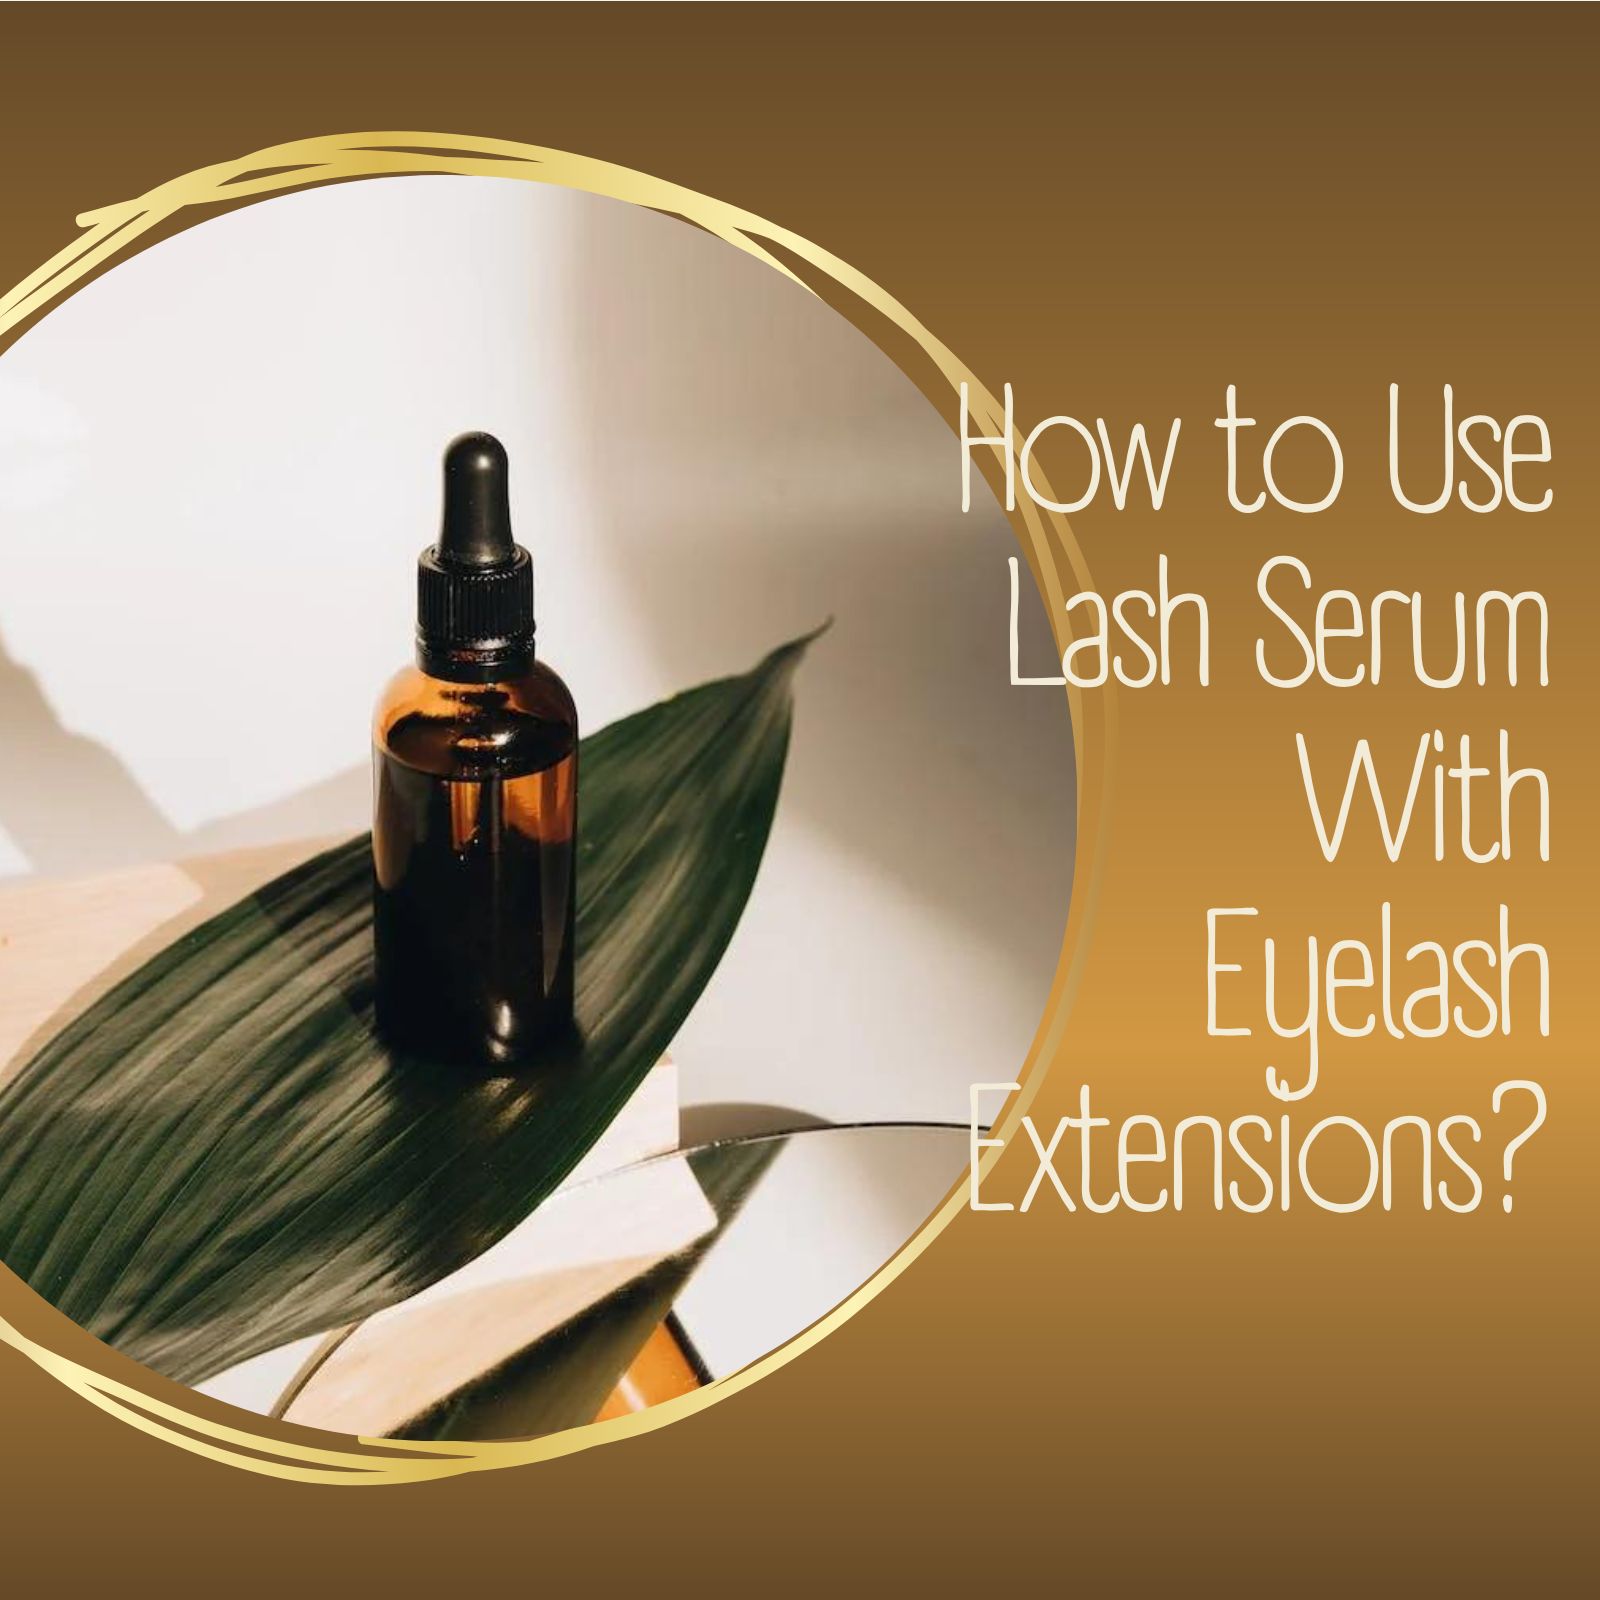 How to Use Lash Serum With Eyelash Extensions